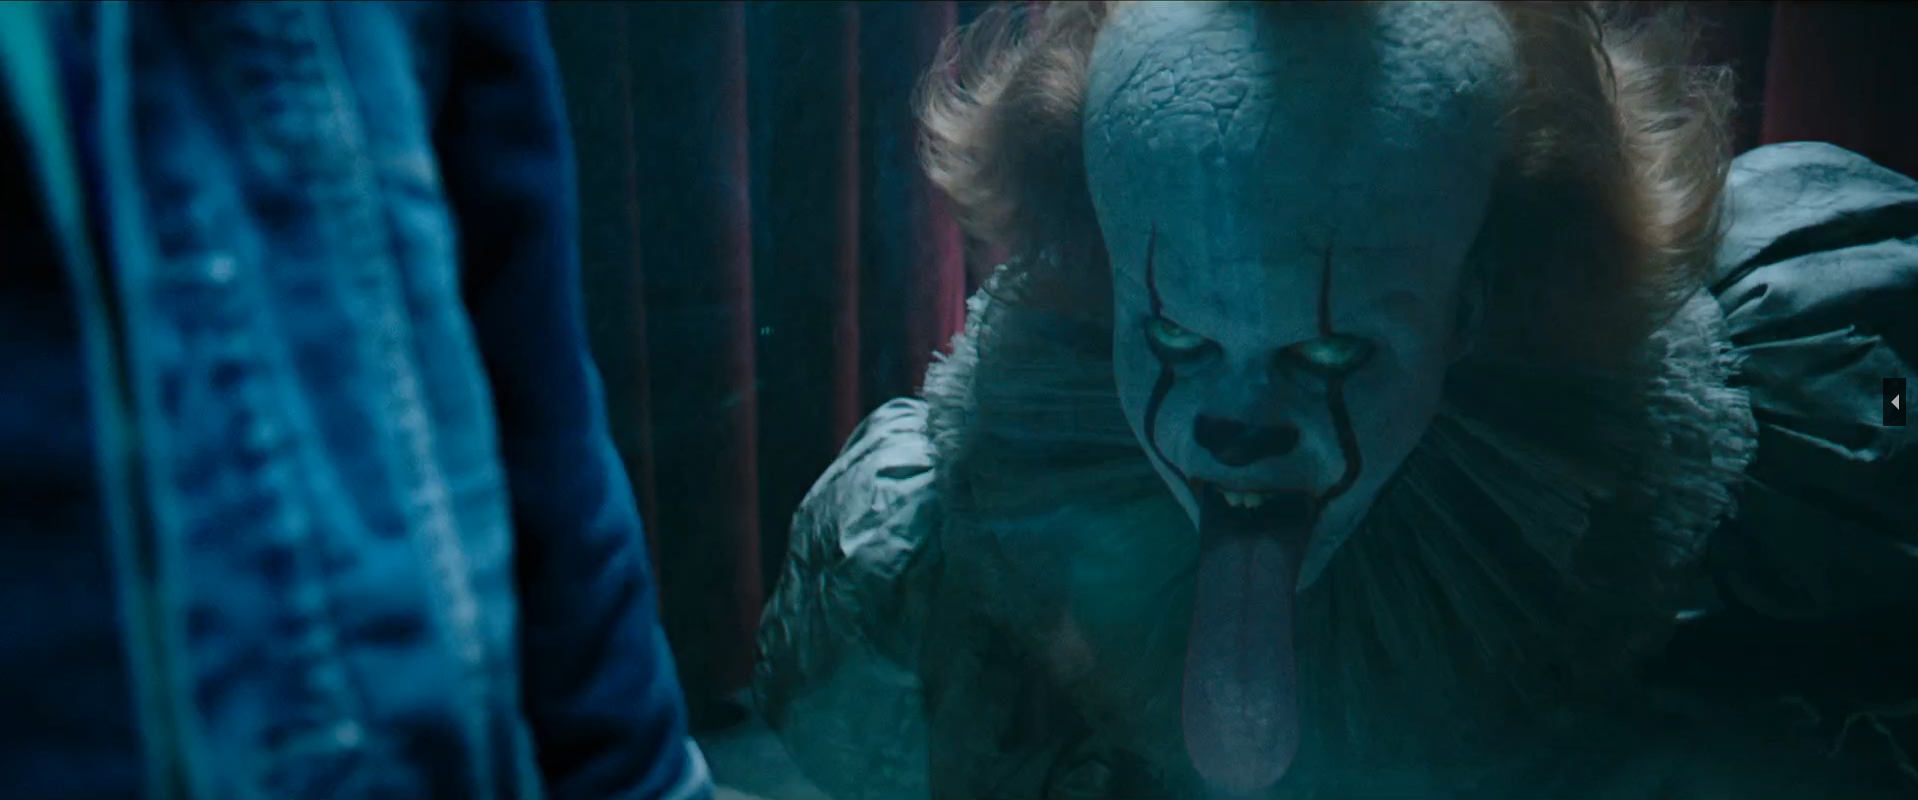 HBO Max is developing a prequel to the horror film "It"